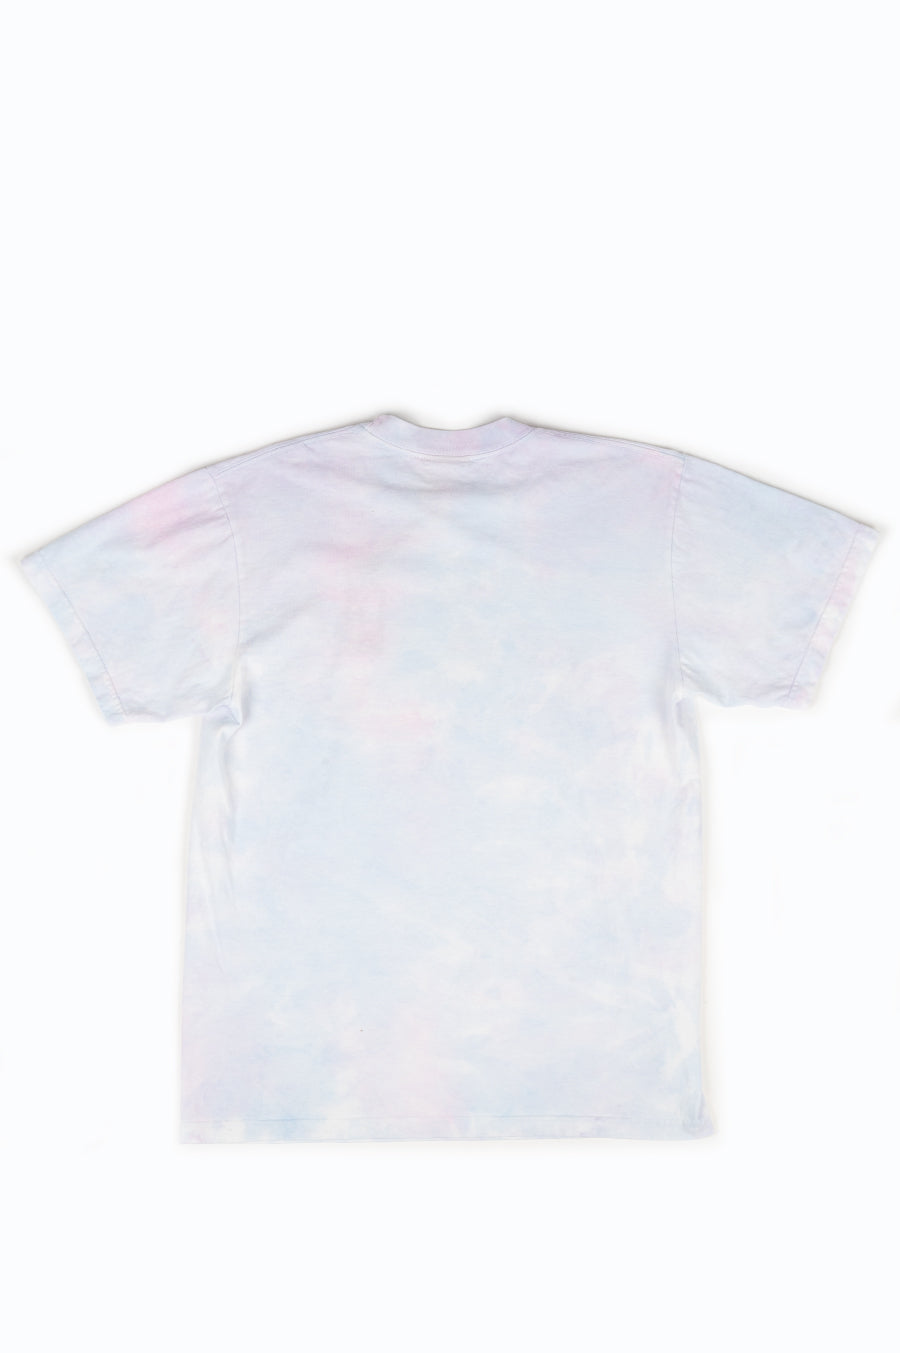 REAL BAD MAN HOUSE OF ECSTASY TEE COTTON CANDY TIE DYE